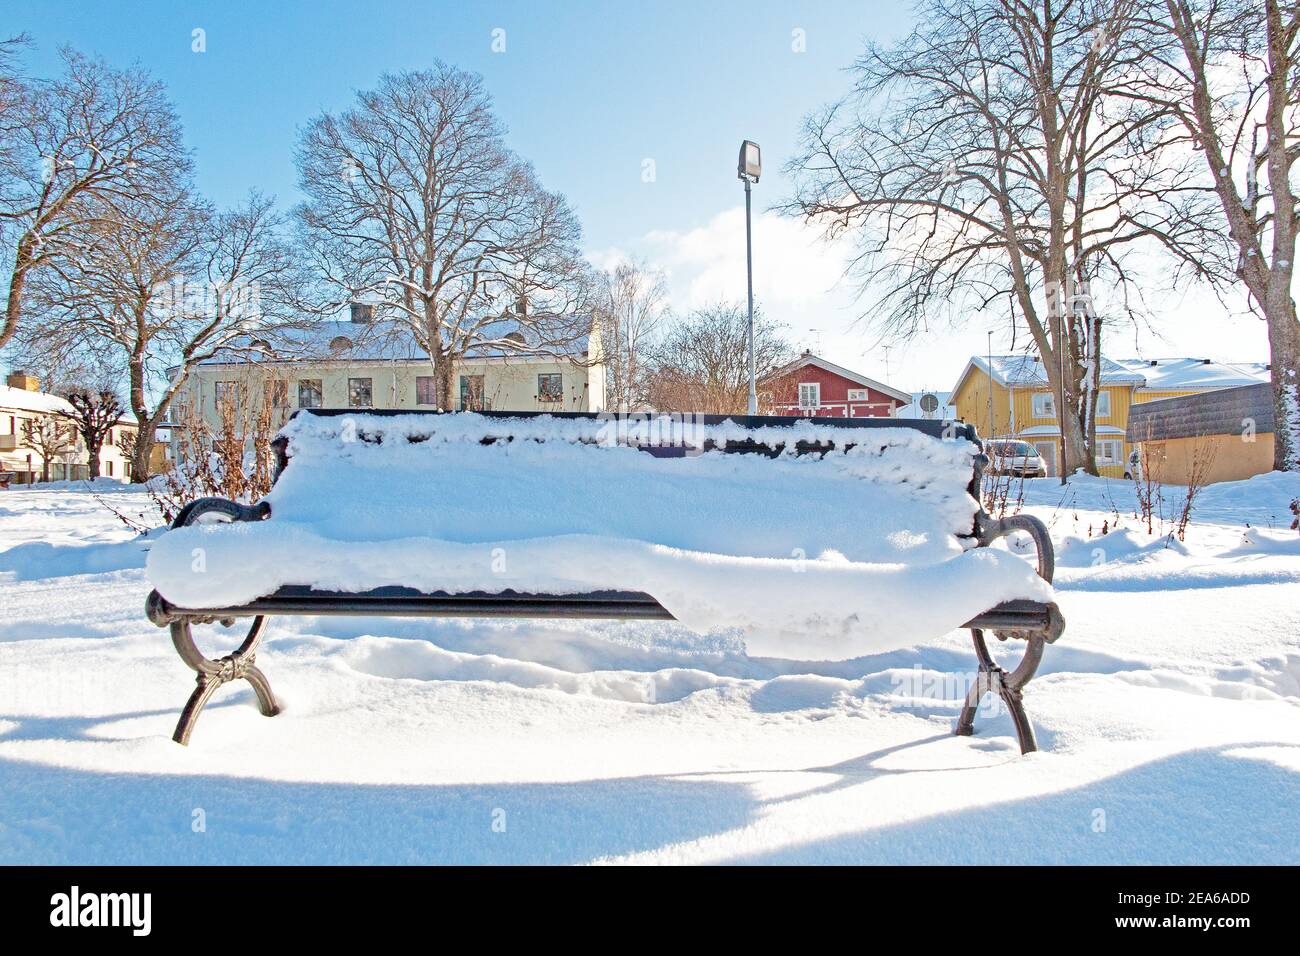 A bench in park covered in snow Photo: Bo Arrhed Stock Photo